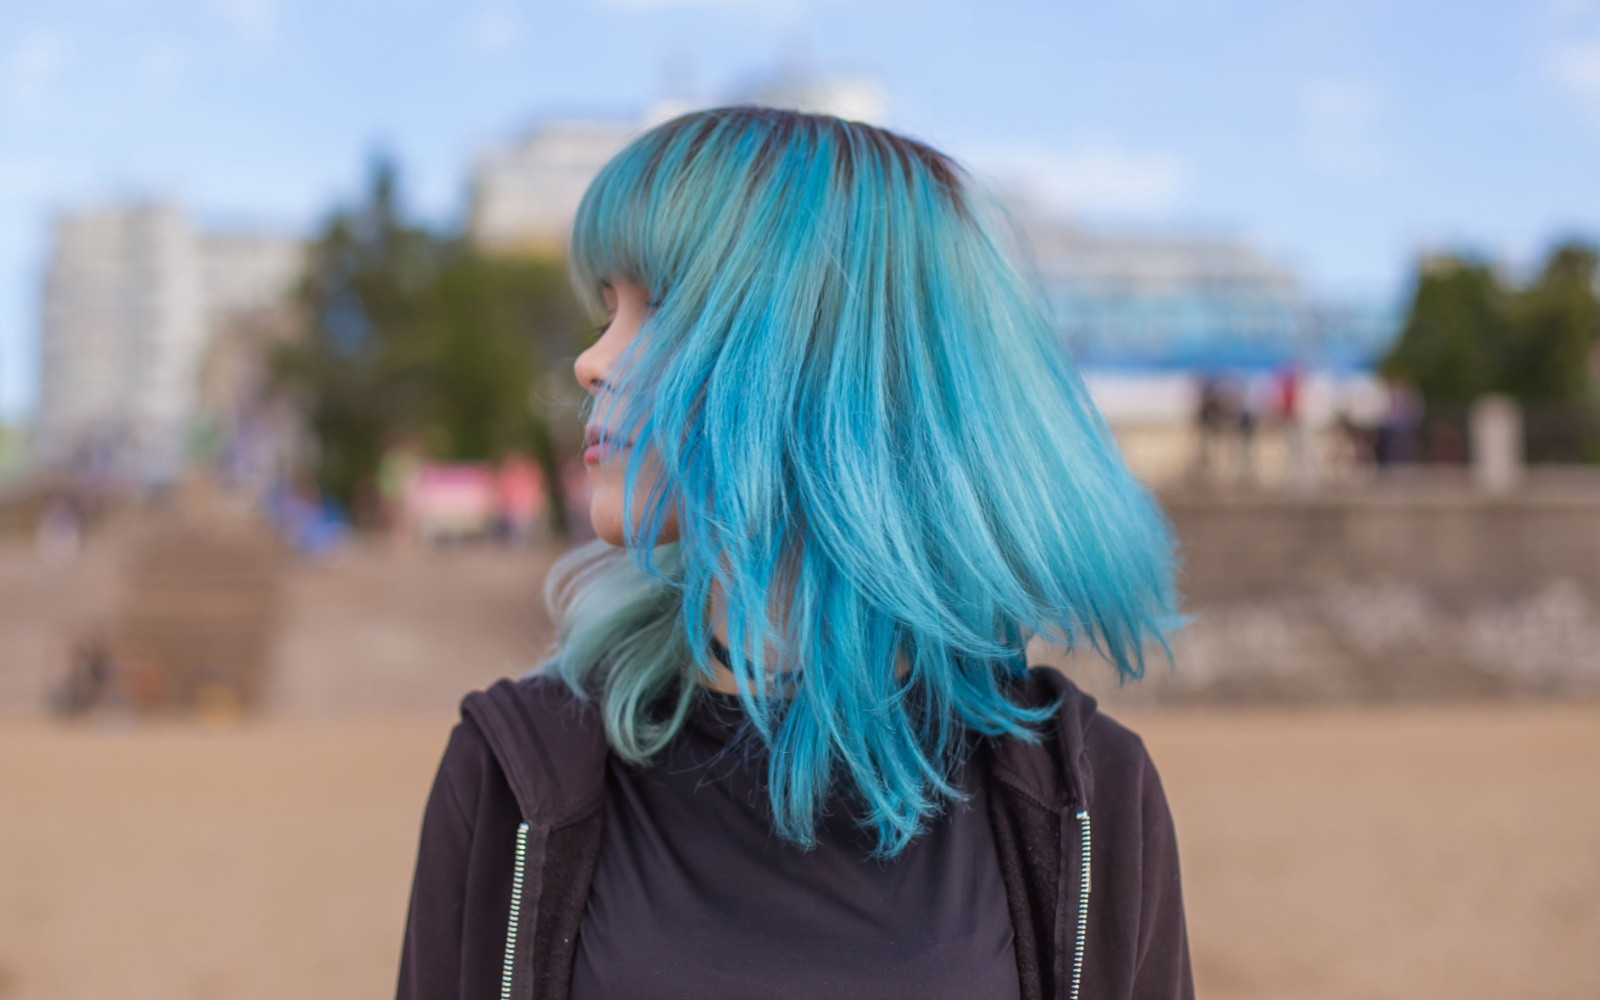 3. "Blue Hair Tips for Short Hair: Dos and Don'ts" - wide 1